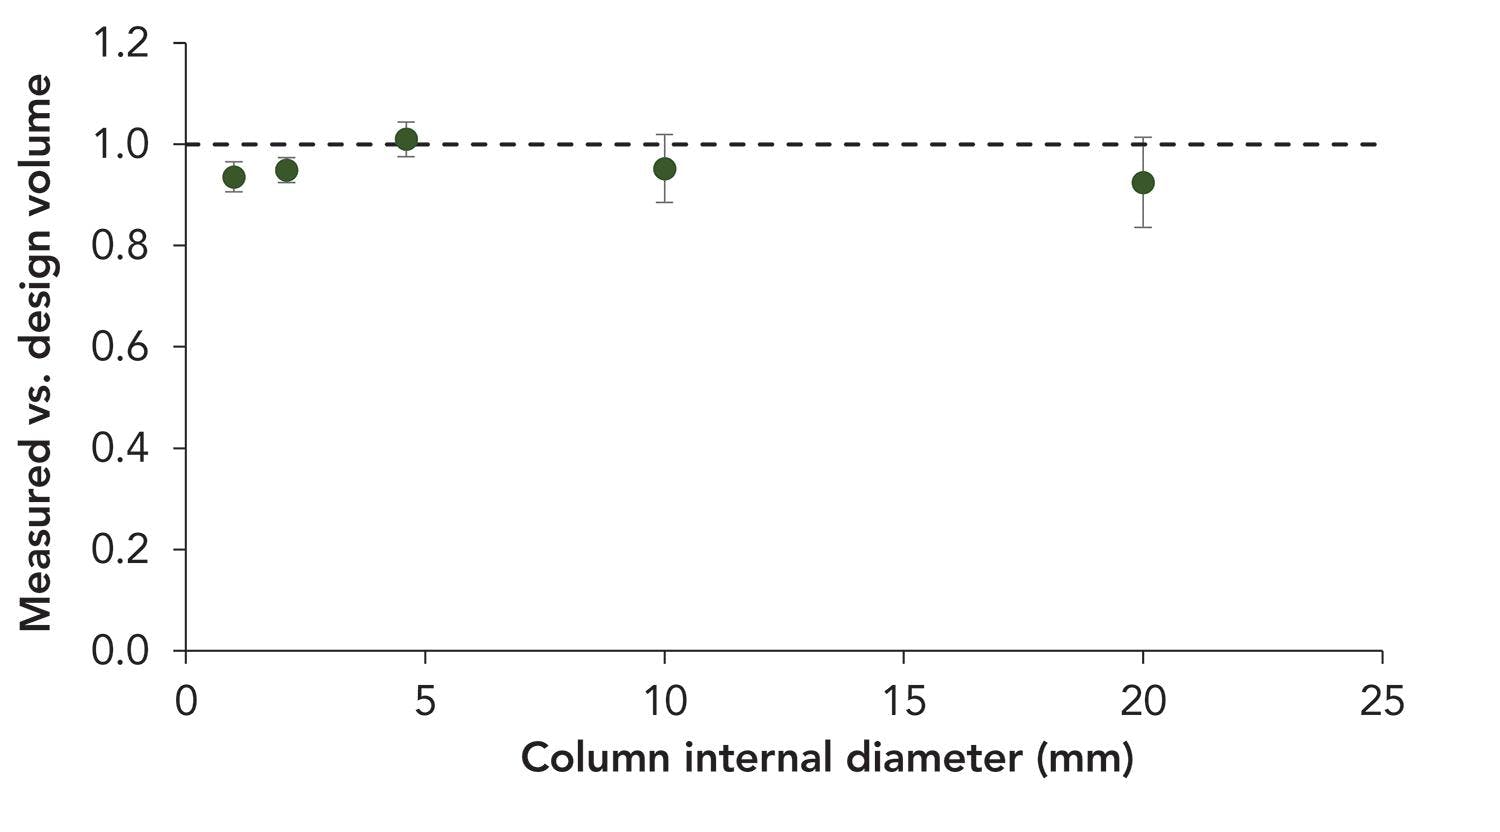 Figure 4: Pycnometric measurements of column void volume compared to the designed volumes of printed lattices at different internal diameters, with a constant length of 2.5 cm.